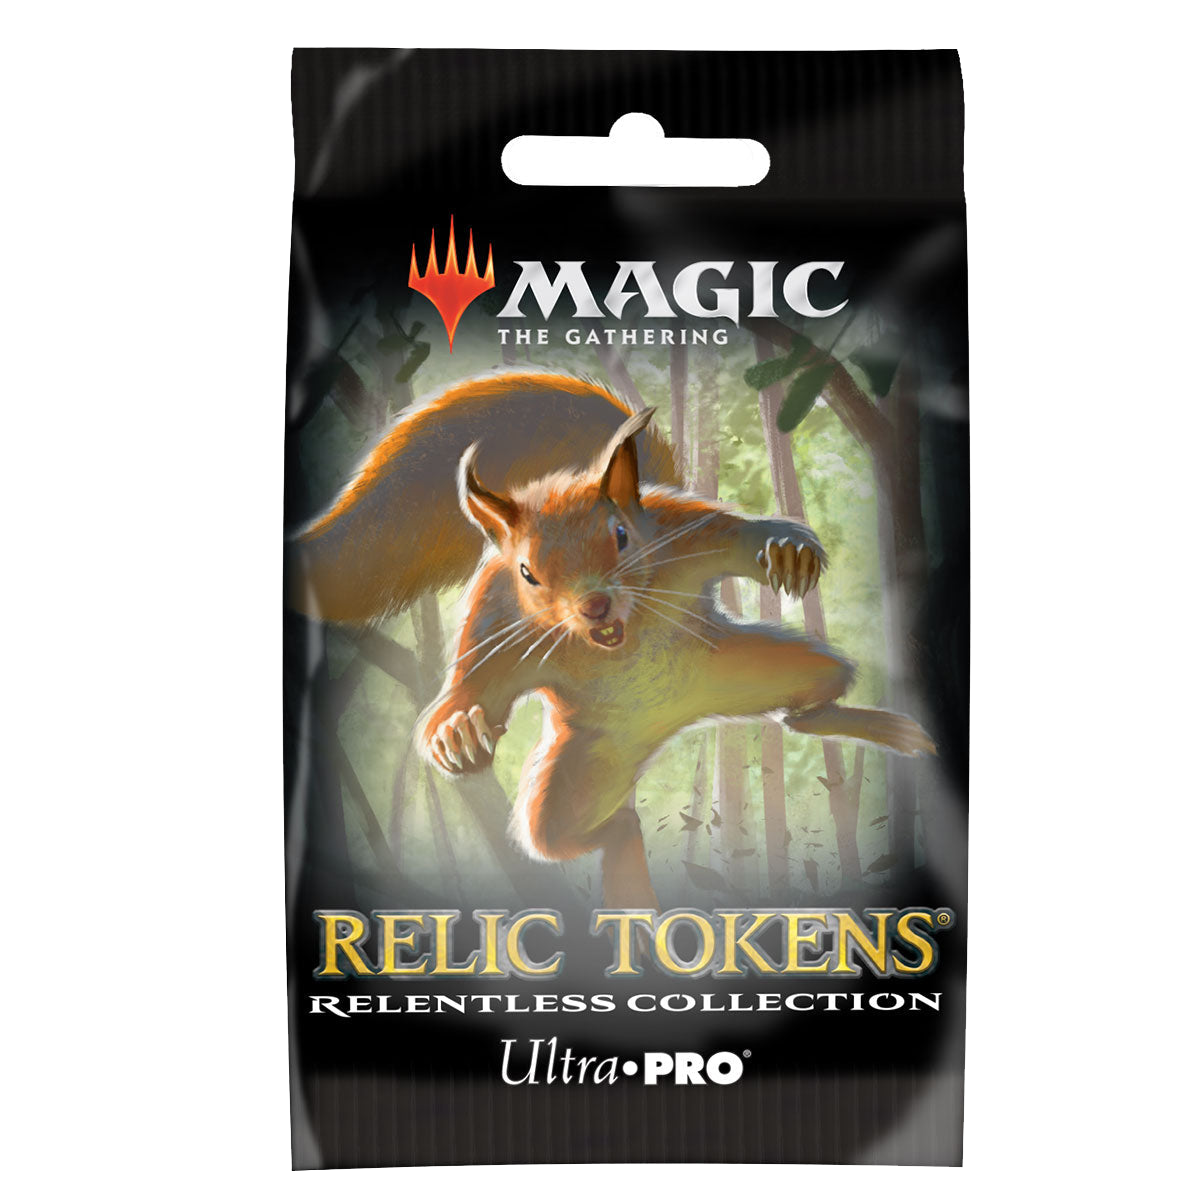 Relic Tokens Relentless Collection (Single Pack) for Magic: The Gathering | Ultra PRO International